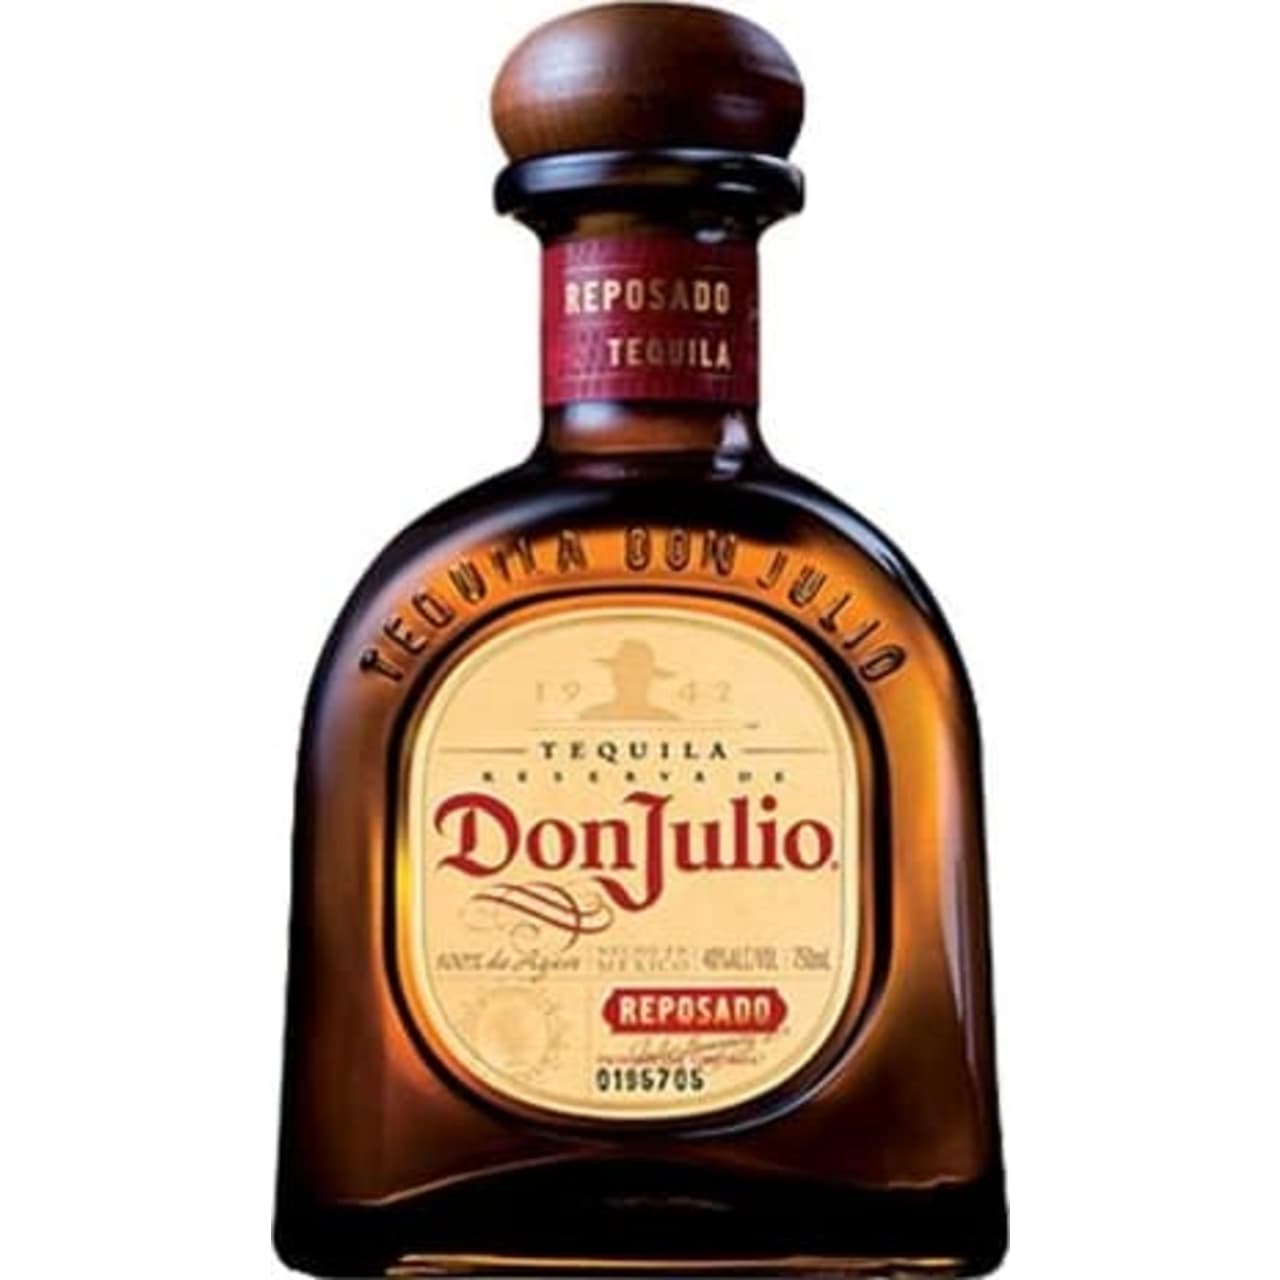 Launched in 1989, this 100 per cent Agave reposado is aged for eight months in recharged American white oak casks previously used to age Tennessee whiskey.